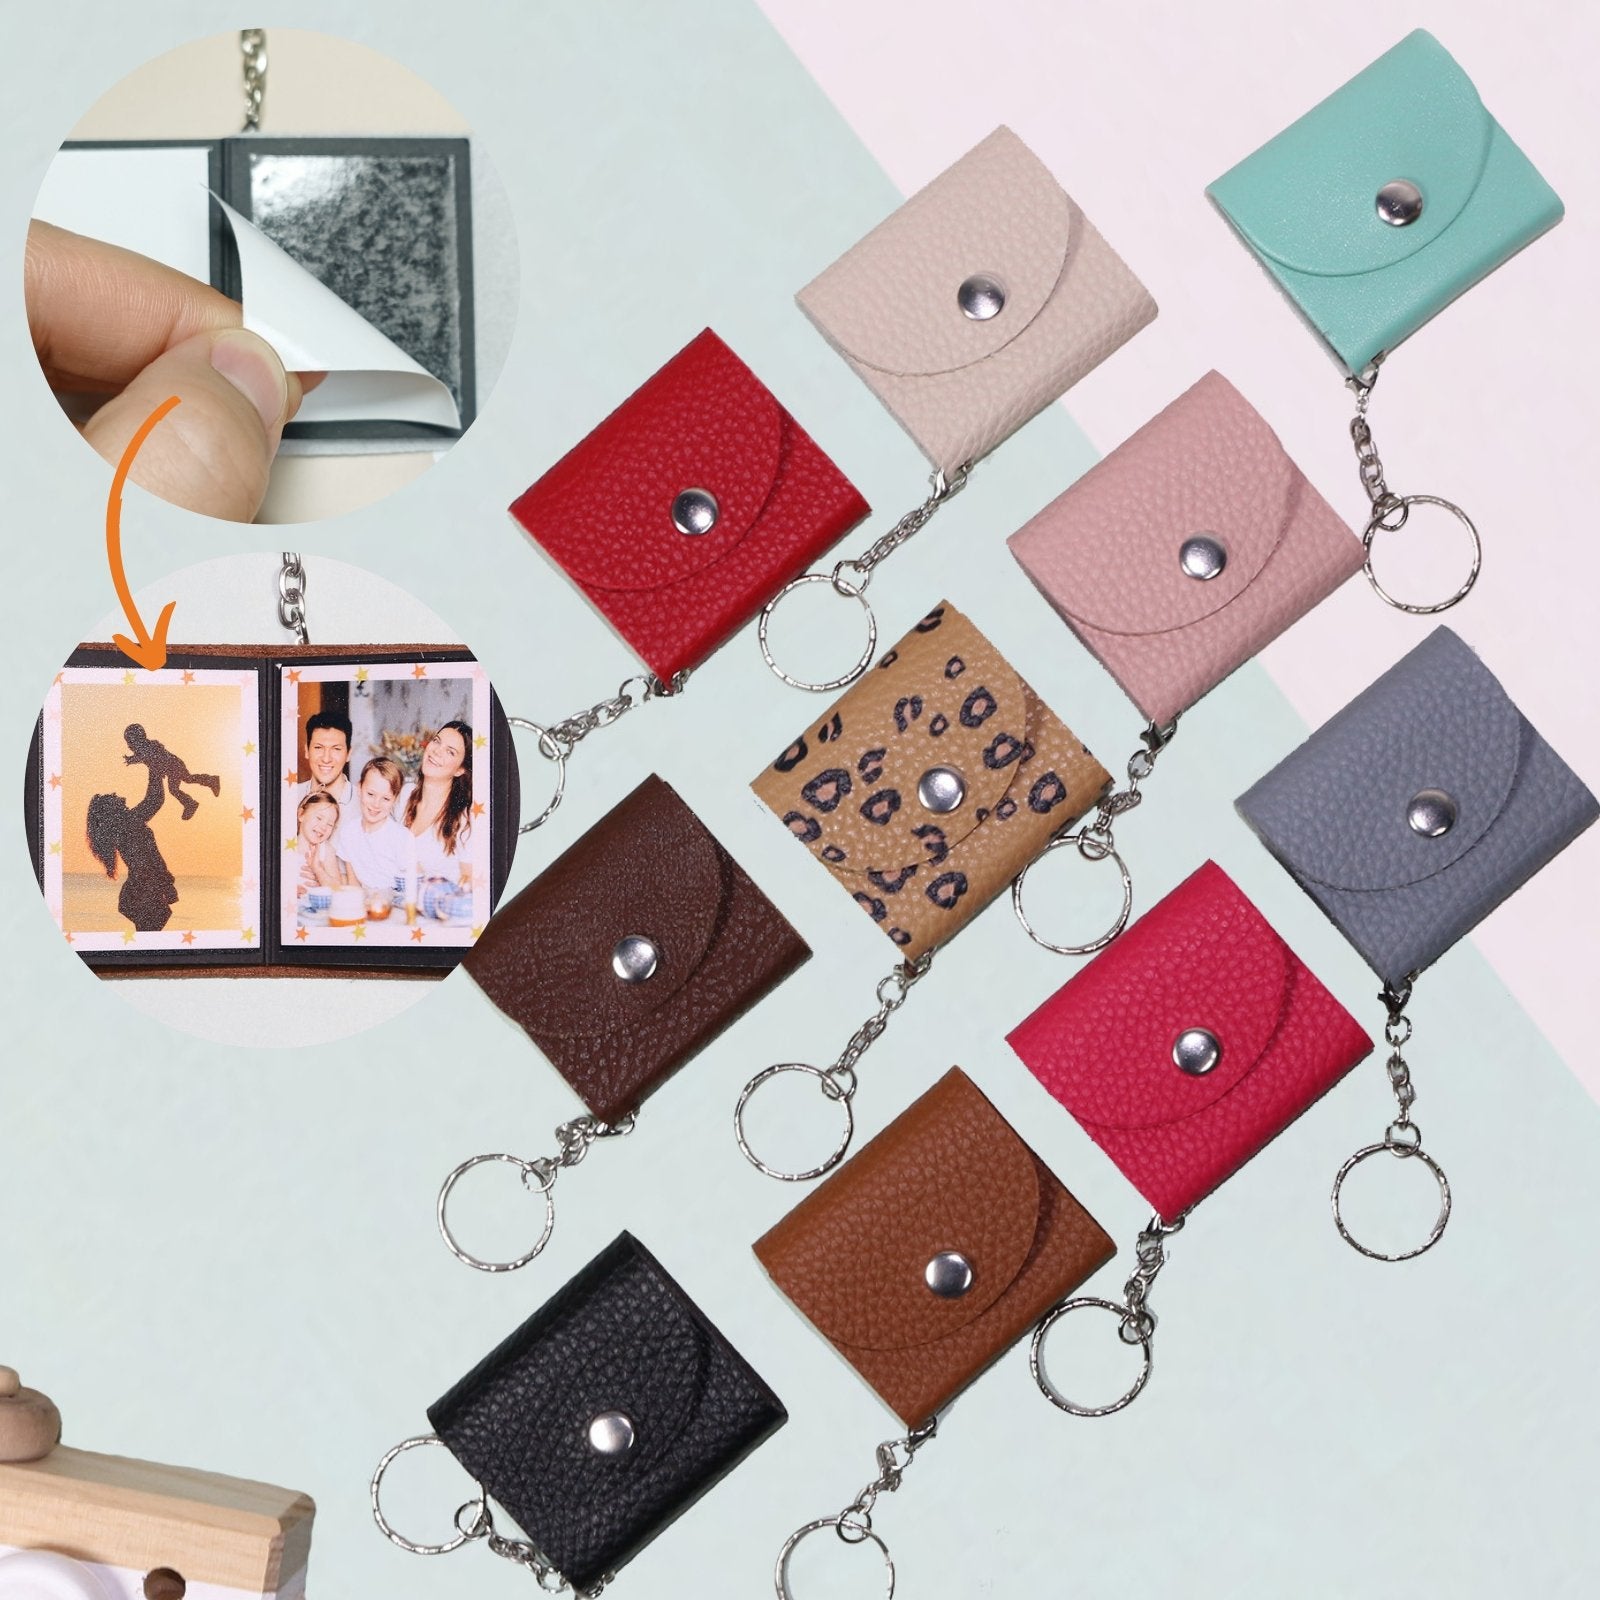  4 Pcs PVC Cover 1 inch Mini Photo Album Keychain with 16  Pockets Photo Card Holder for Memory Gift, Clear Glitter : Home & Kitchen